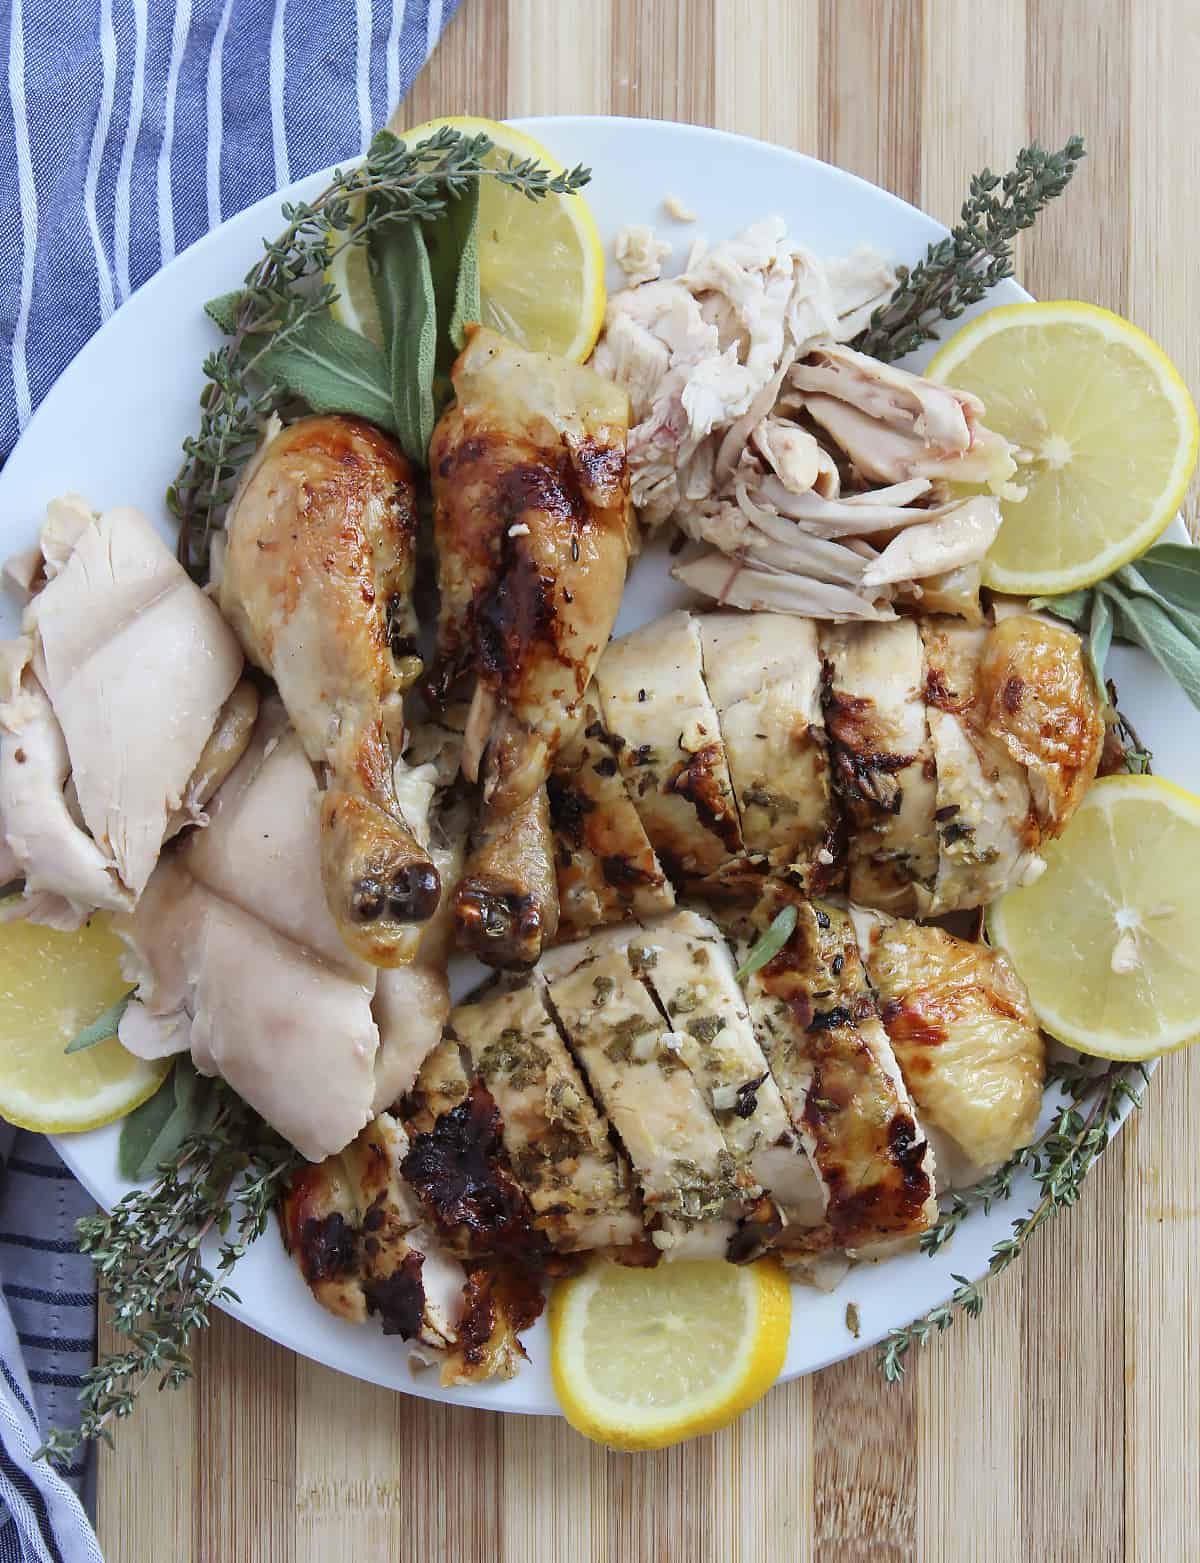 Pieces of slow roasted chicken on a plate with lemon and herbs